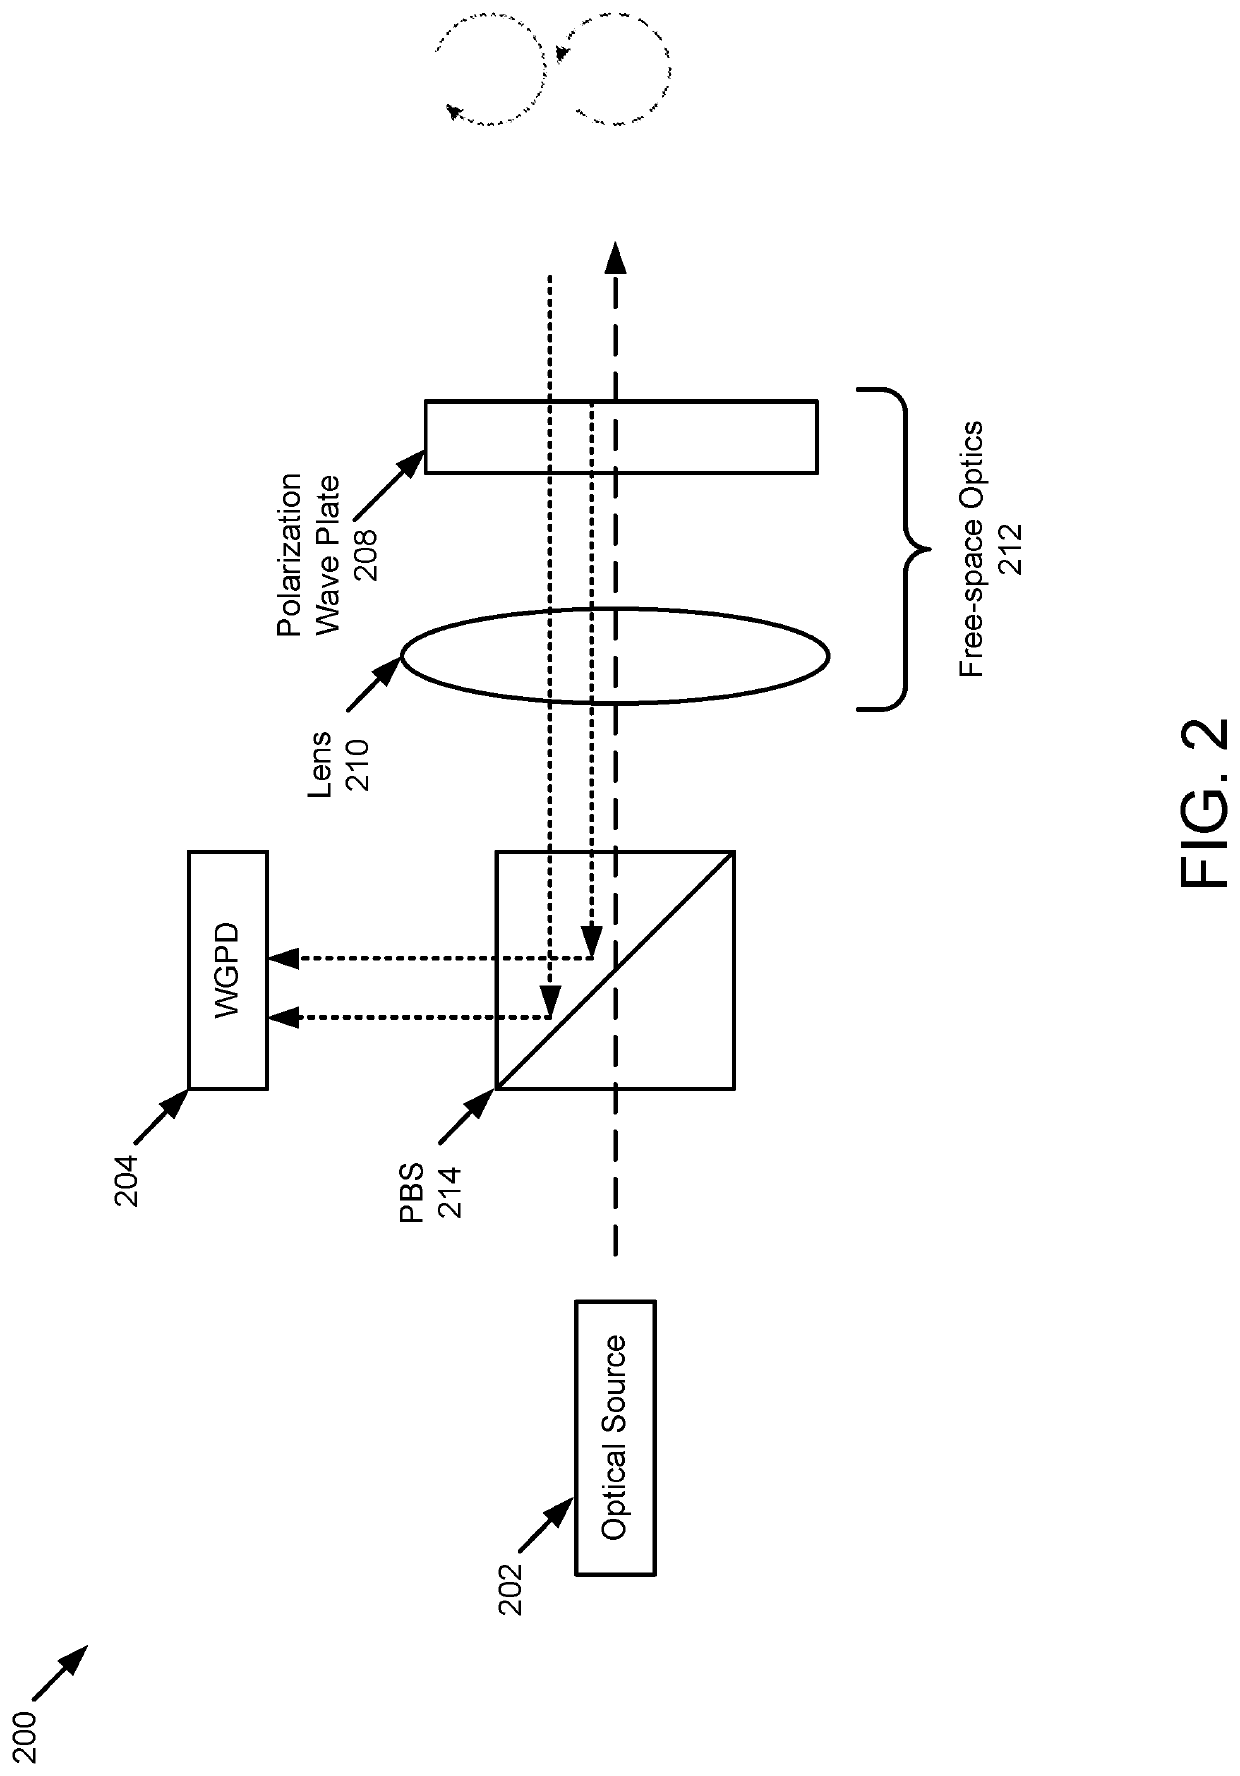 Lidar system with a multi-mode waveguide photodetector